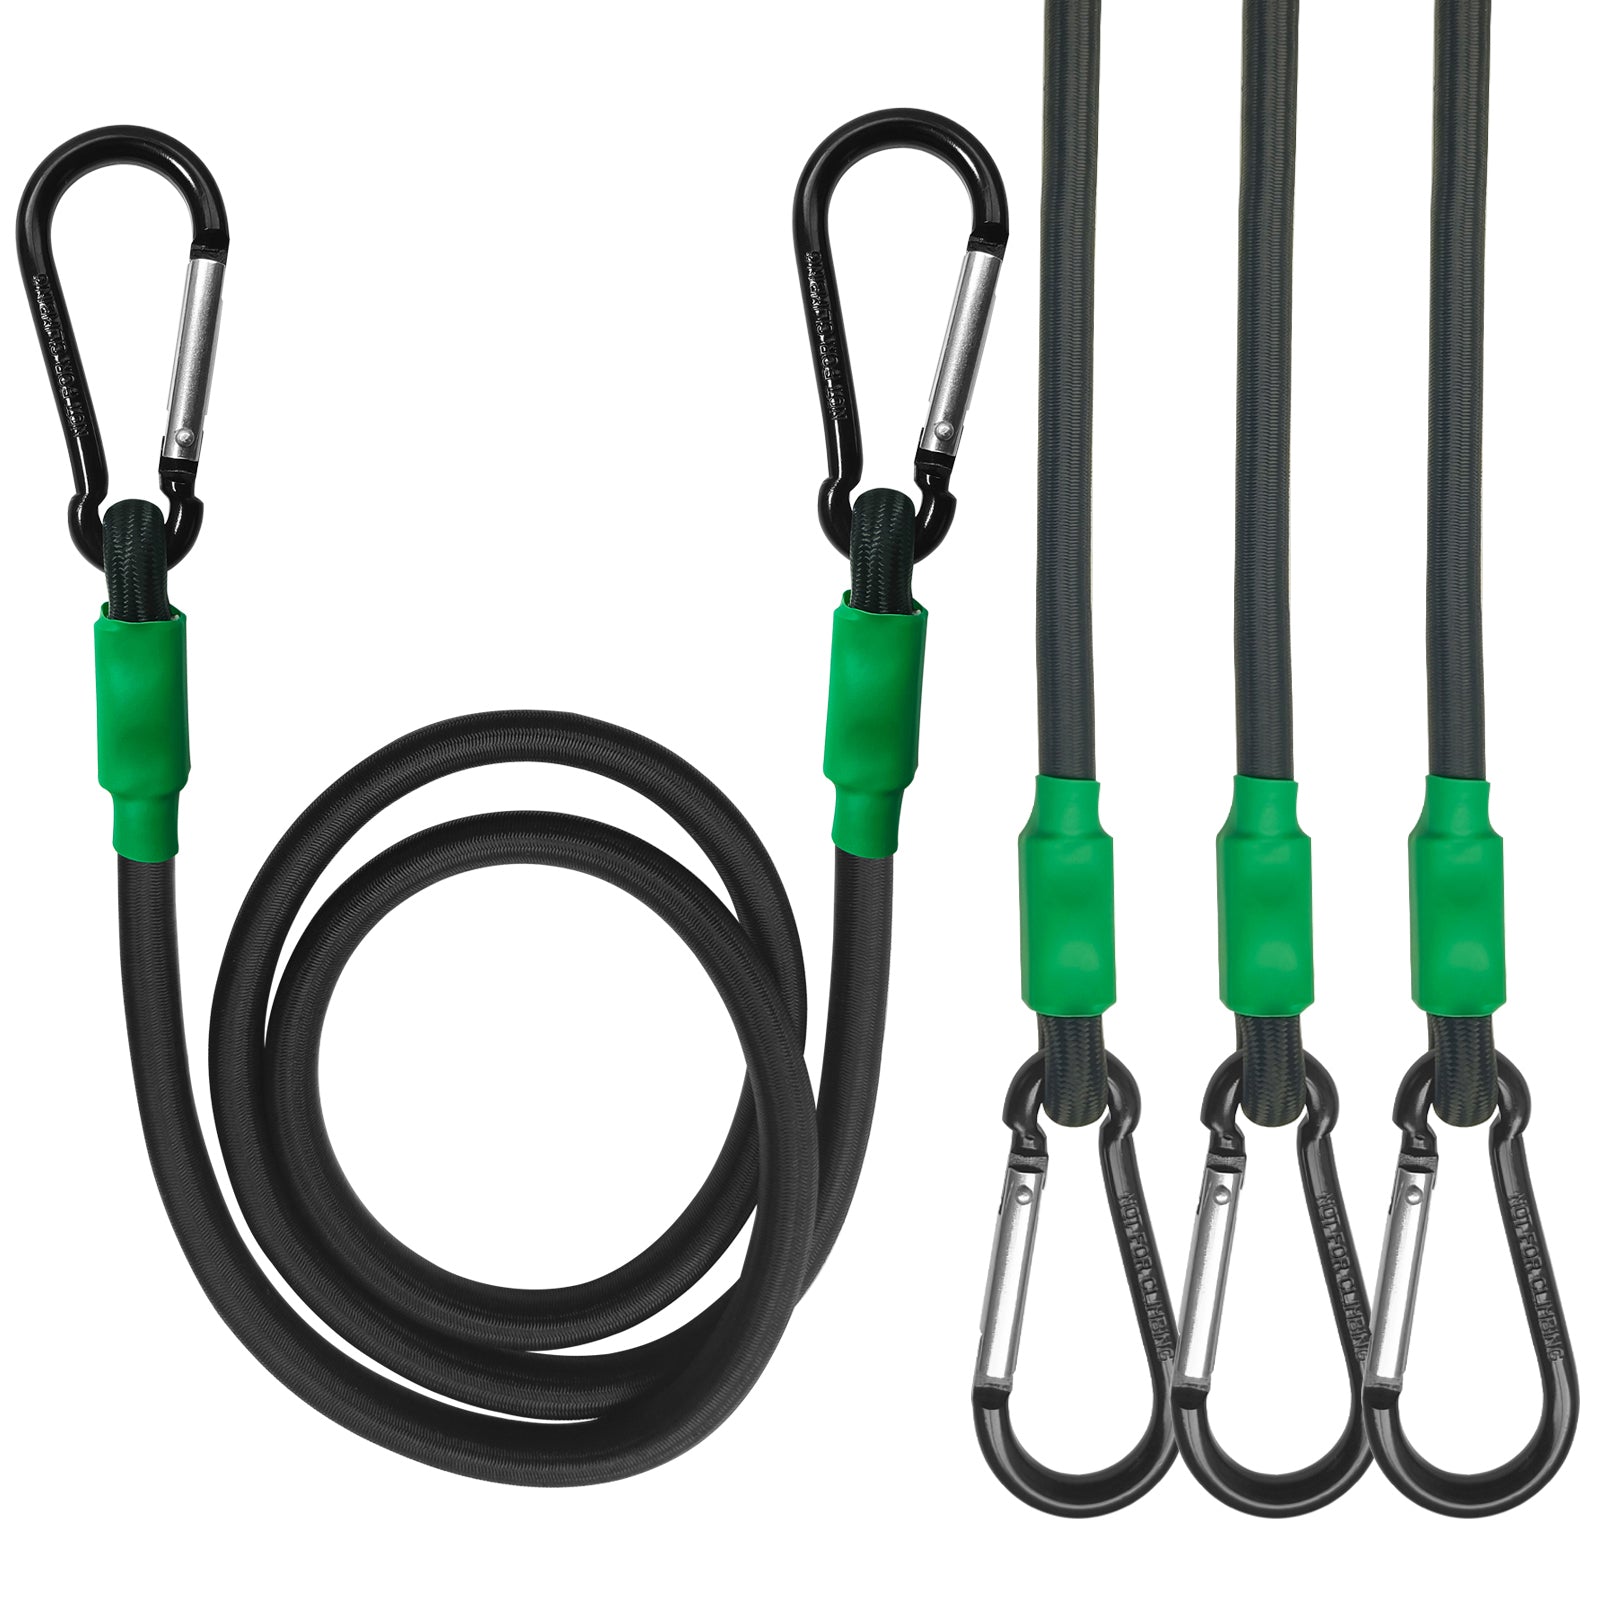 Yuxh Bungee Cords with Carabiner Hooks 3.2 Feet Carabiner at Each End 3  Pack Rubber Bungee Cords with Hooks Black